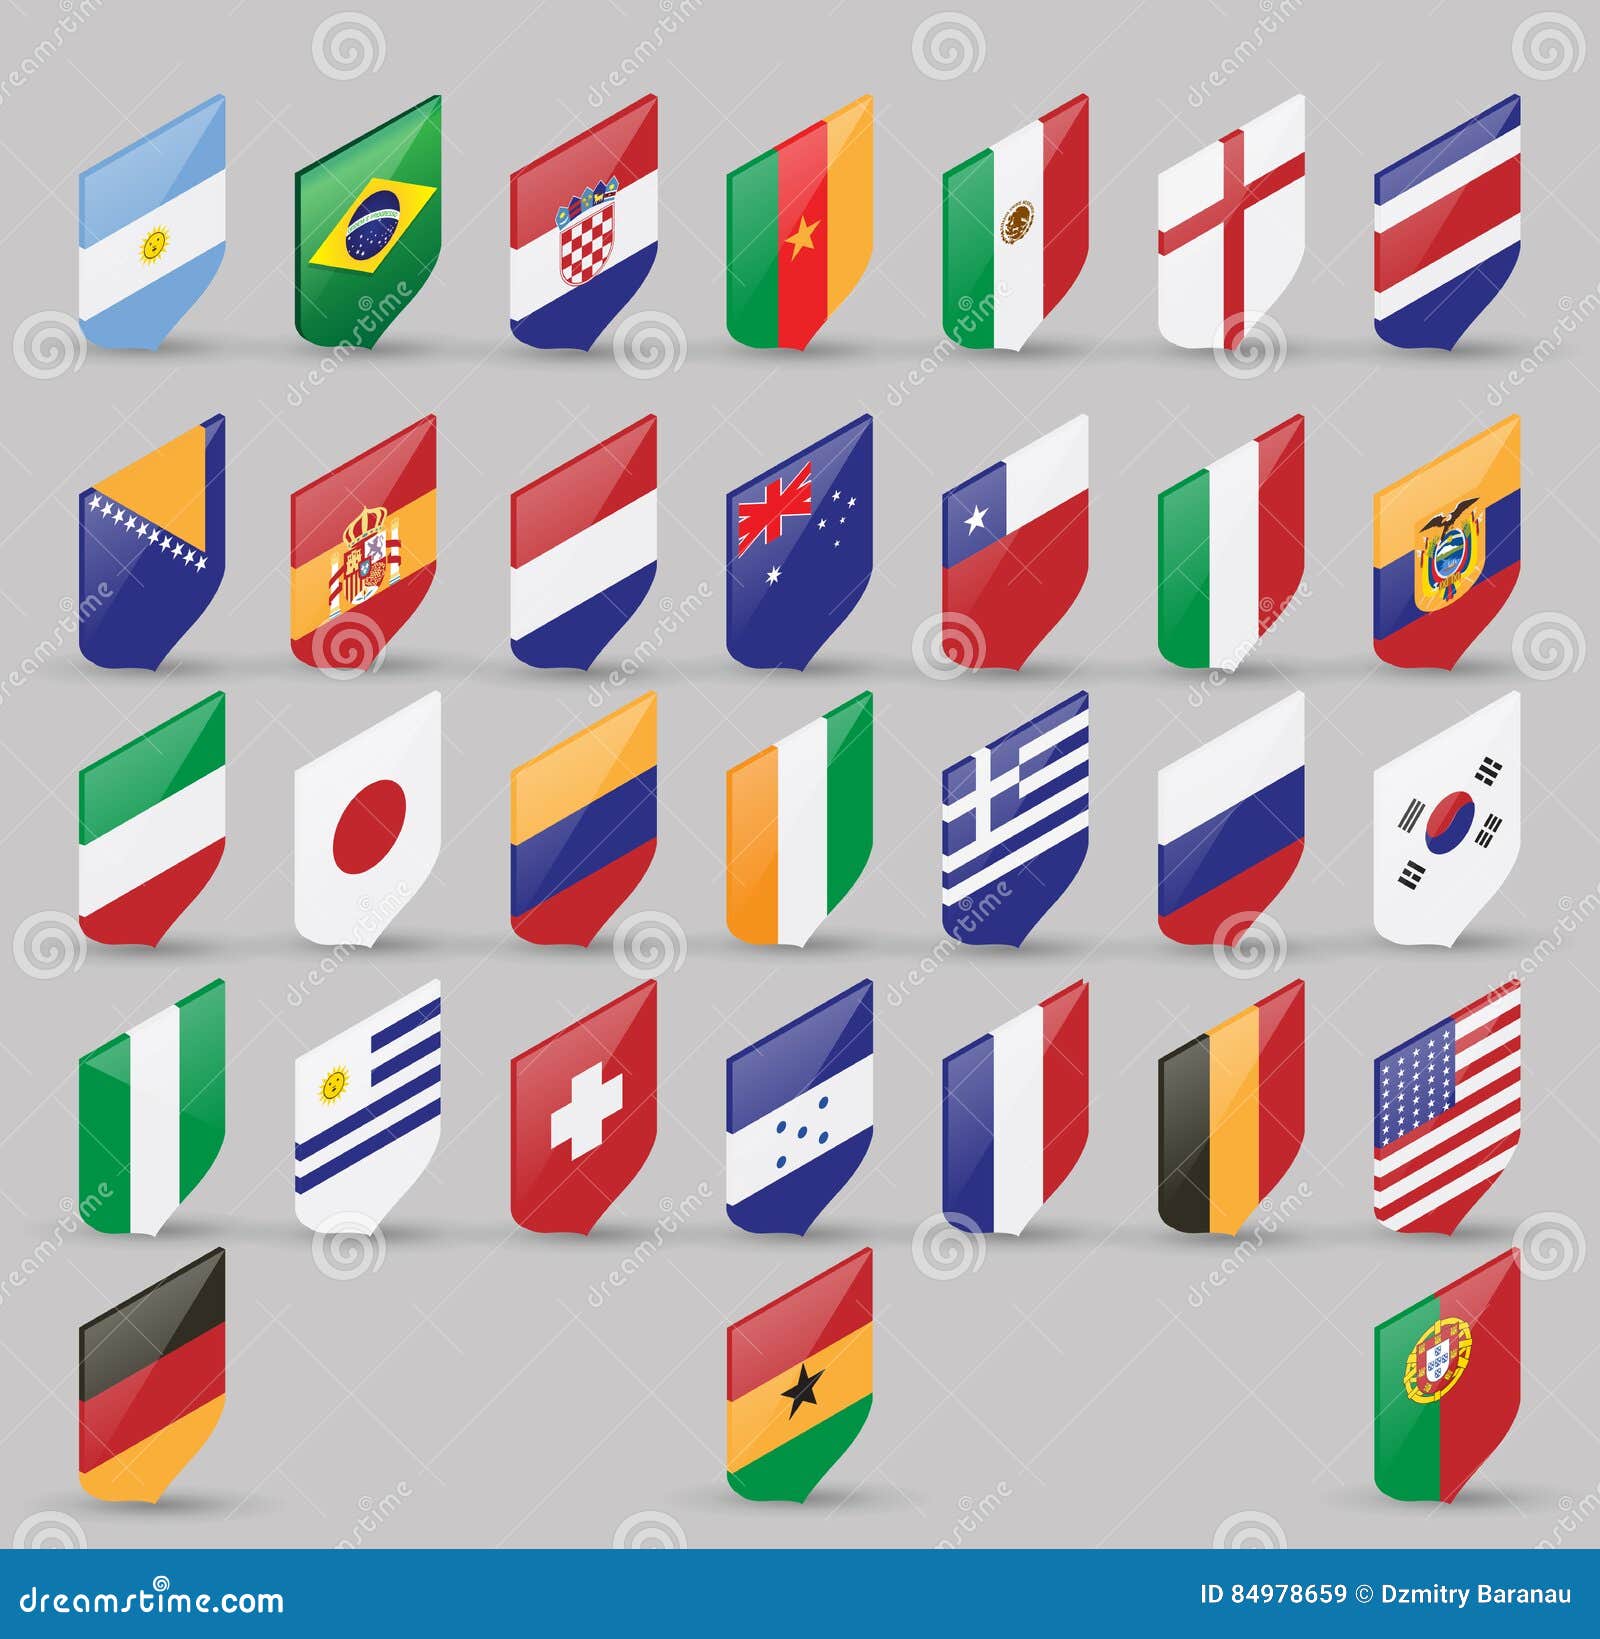 Vector Set Of World Flags Of Sovereign States Isometric View Isolated